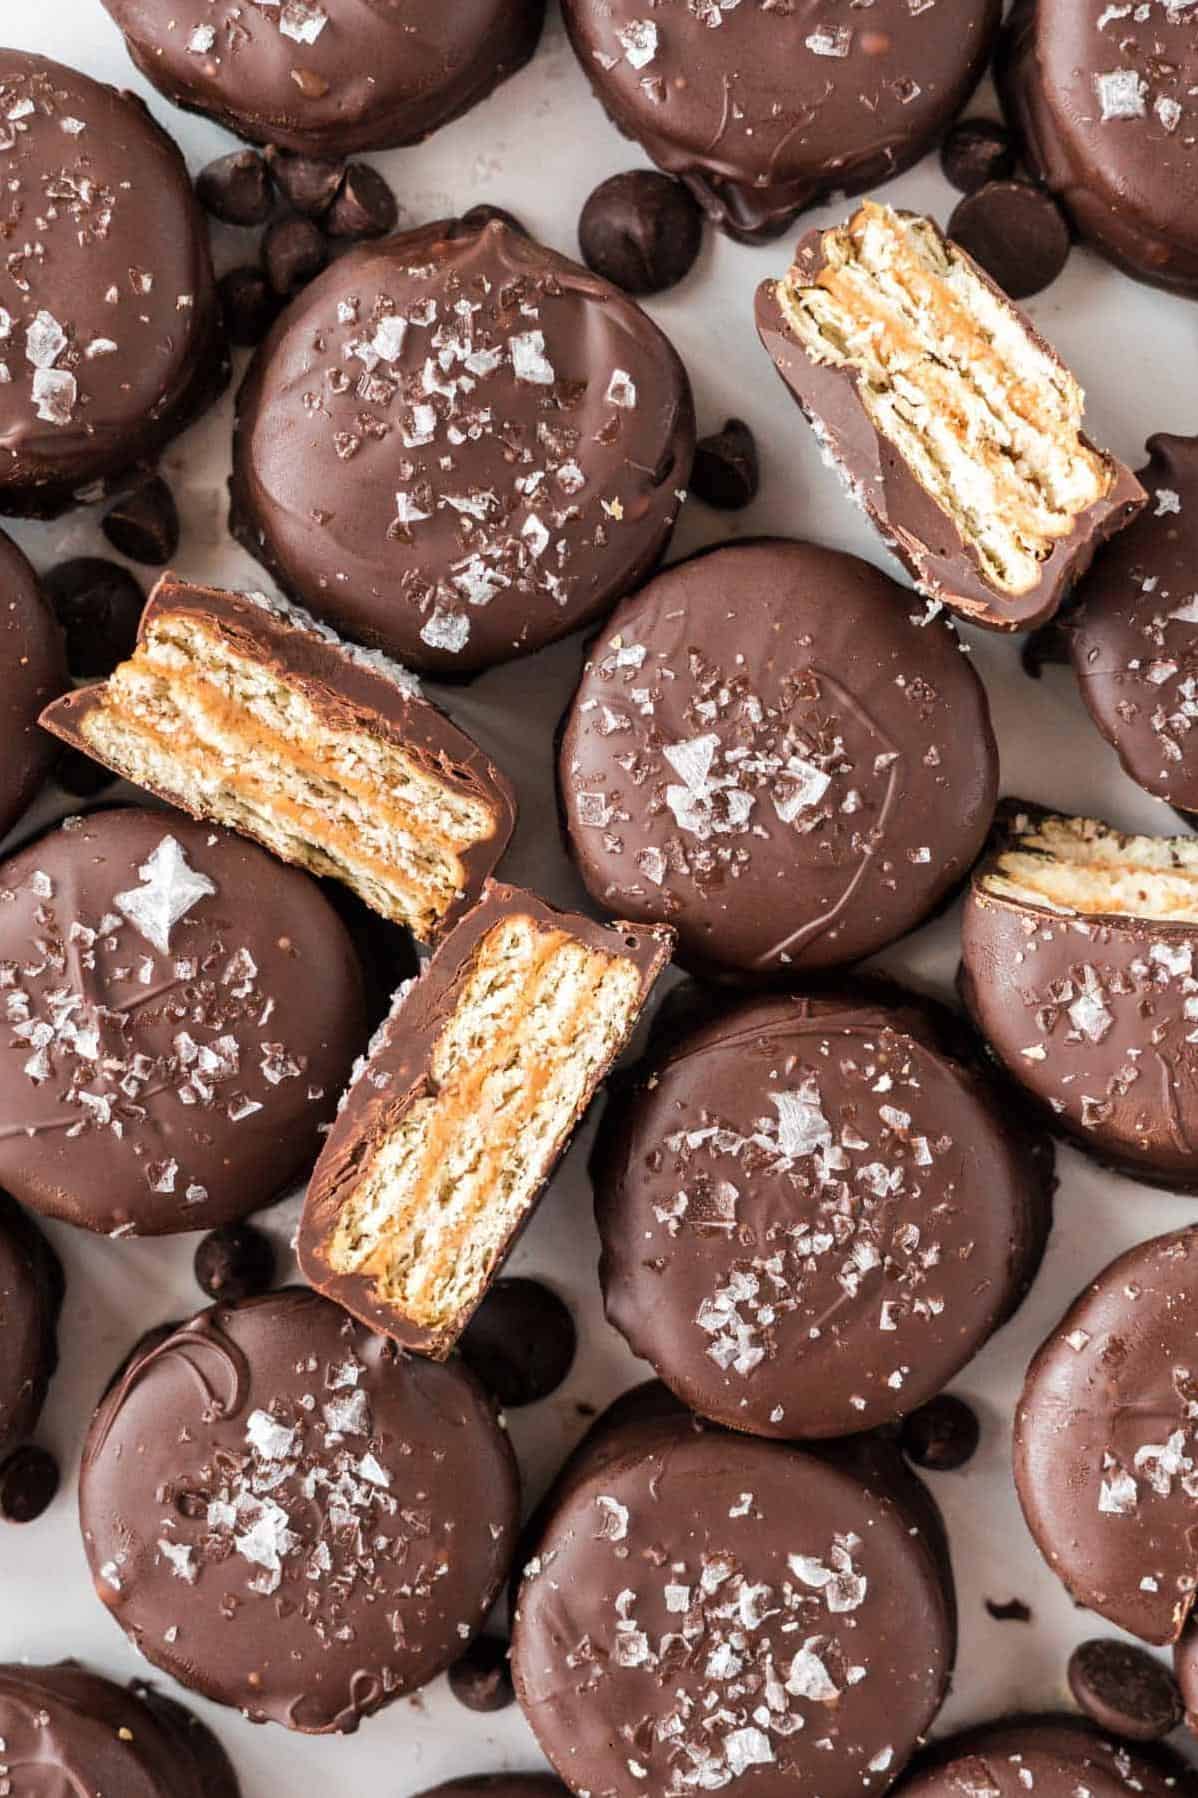  The buttery crunch of Ritz crackers coupled with sweet chocolate and a sprinkle of sea salt.